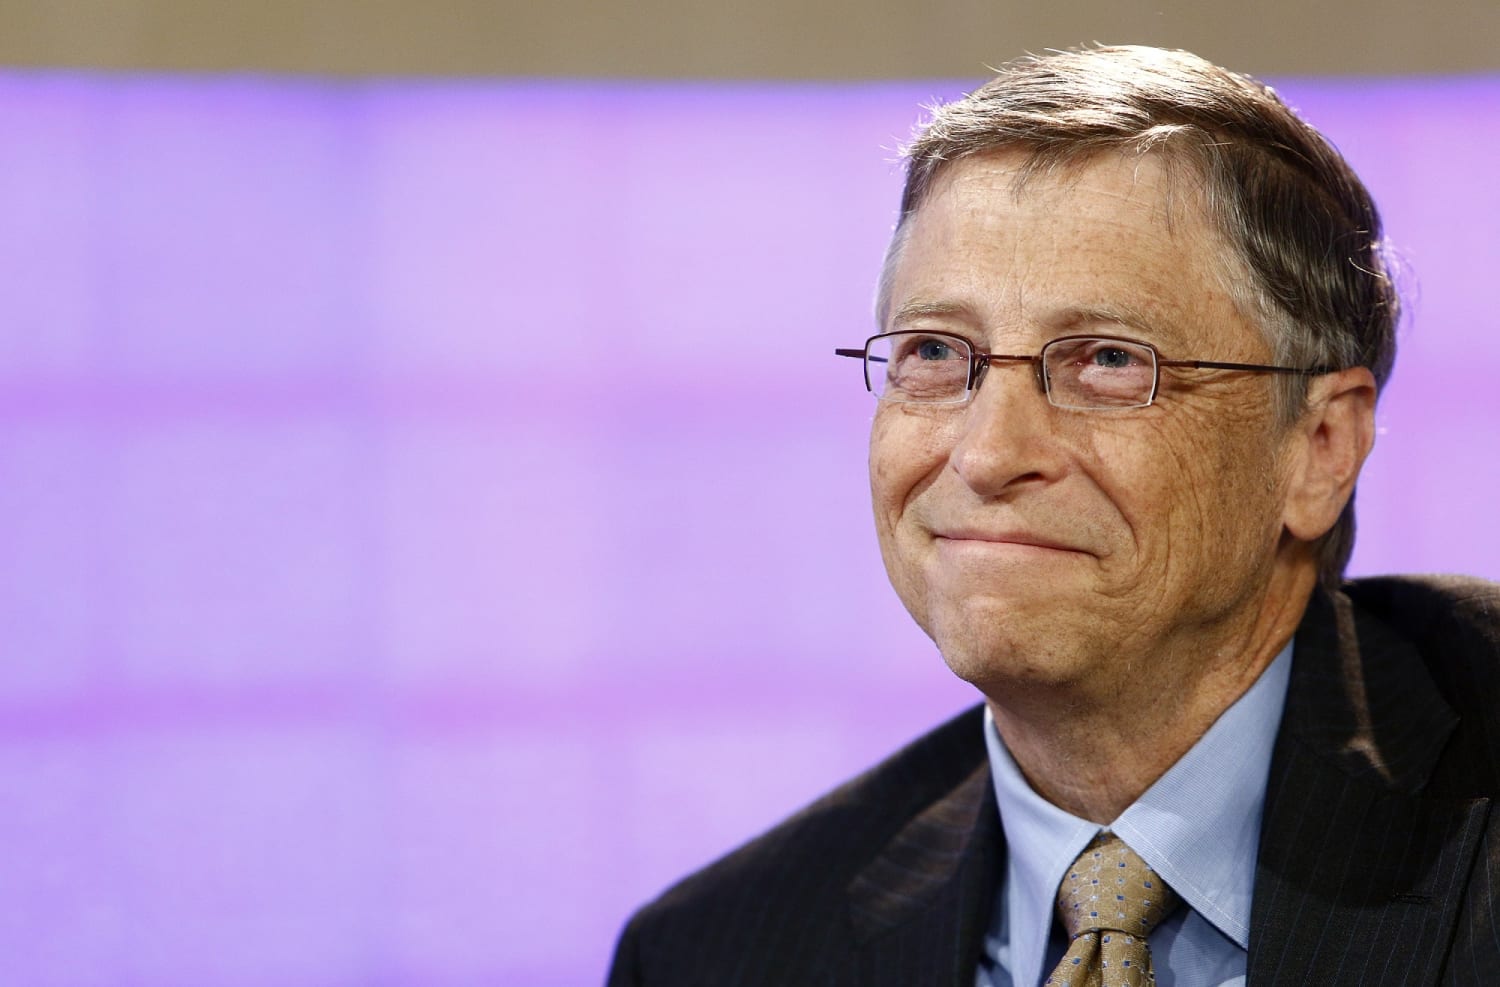 6 things successful people like Bill Gates and Jeff Bezos do on weekends to make their Mondays more productive